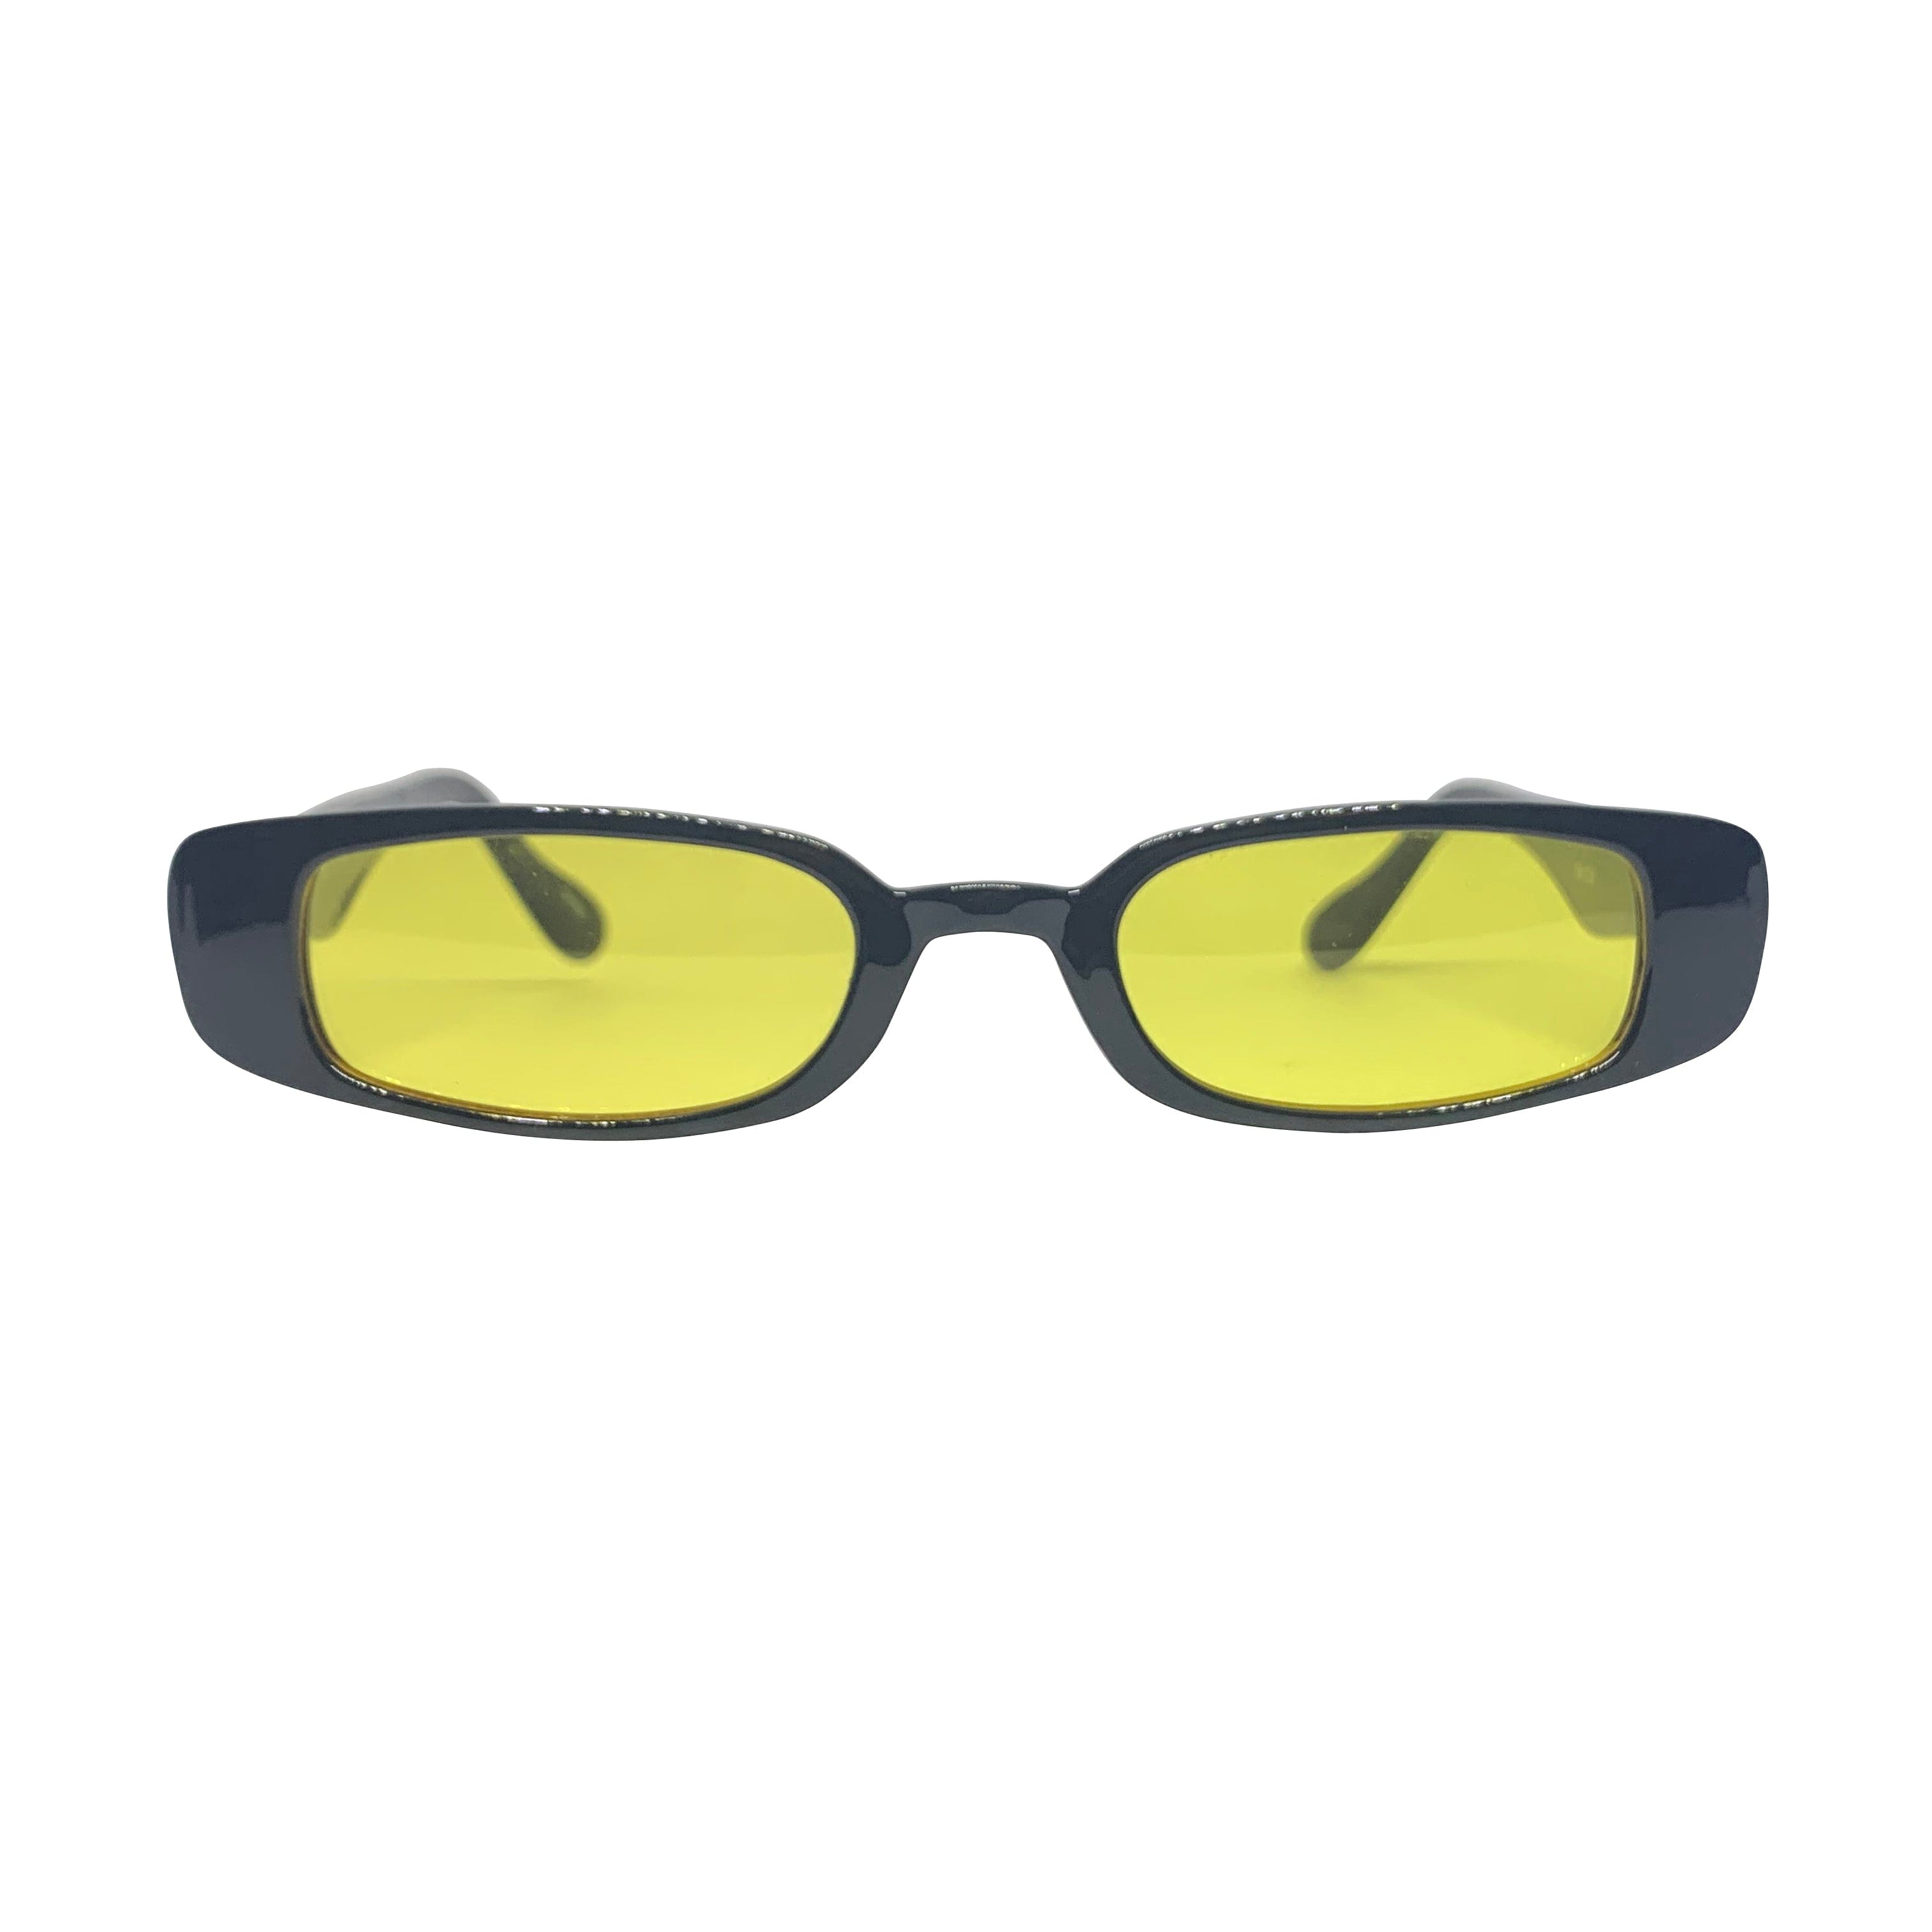 SKWAT Black and Yellow 90s Style Sunnies